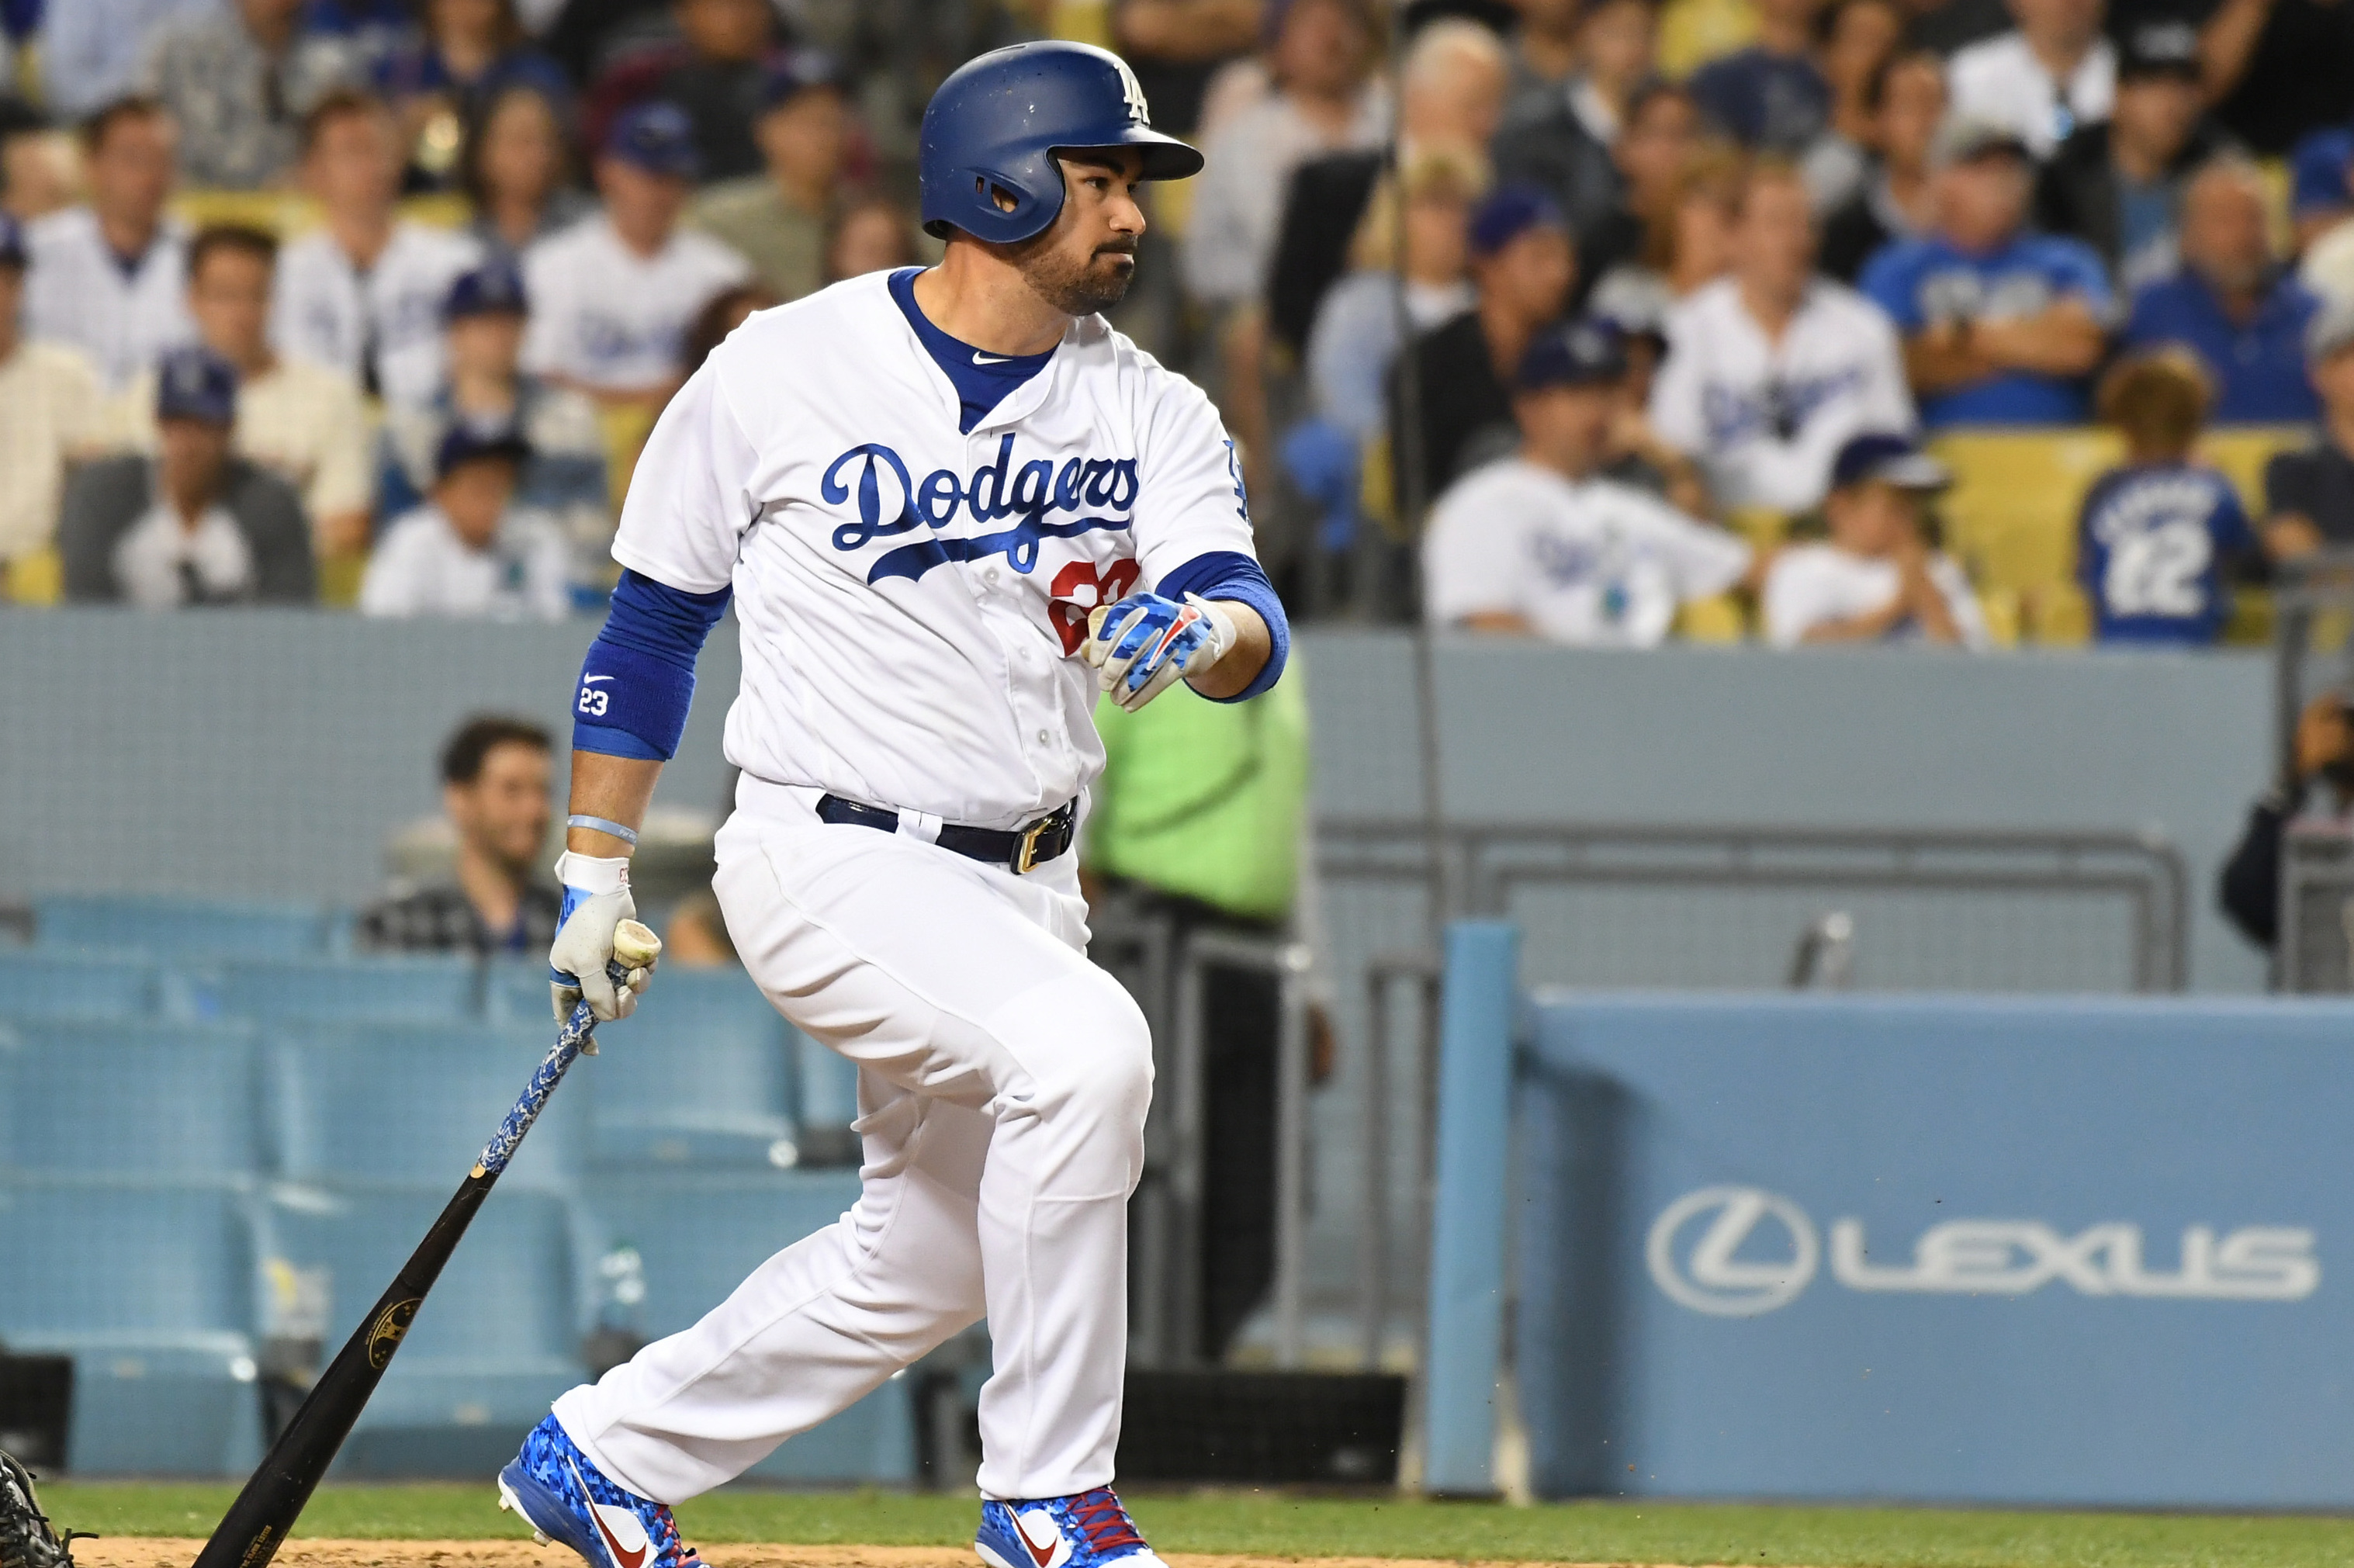 Adrian Gonzalez rejoins Dodgers after return from Italy – Daily News